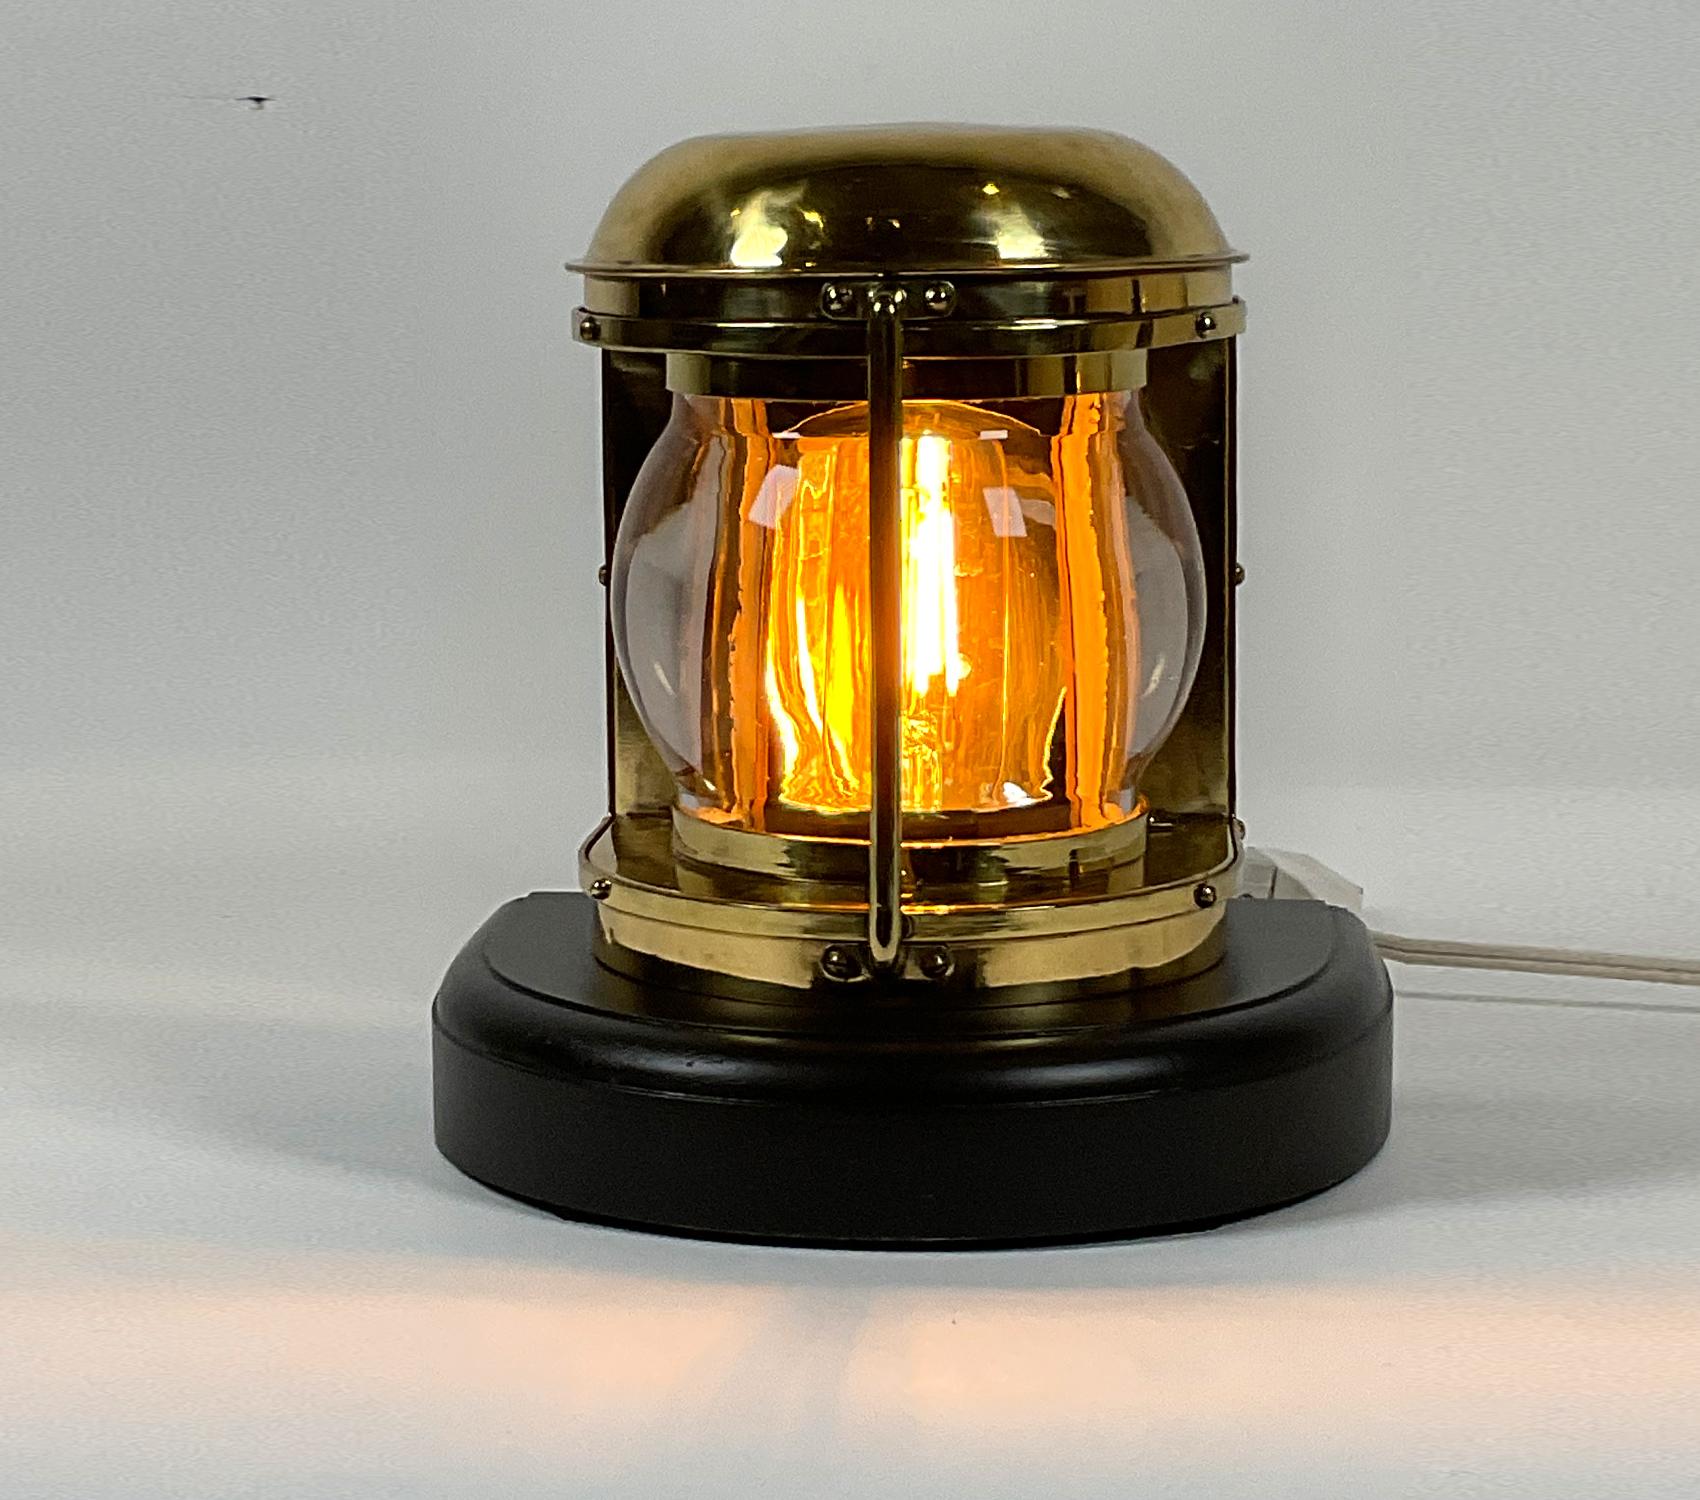 Ships lantern with beautiful dioptric lens and protective brass bar. Meticulously polished and lacquered. Mounted to a thick mahogany base and wired for home use. 

Weight: 6 LBS
Overall dimensions: 10